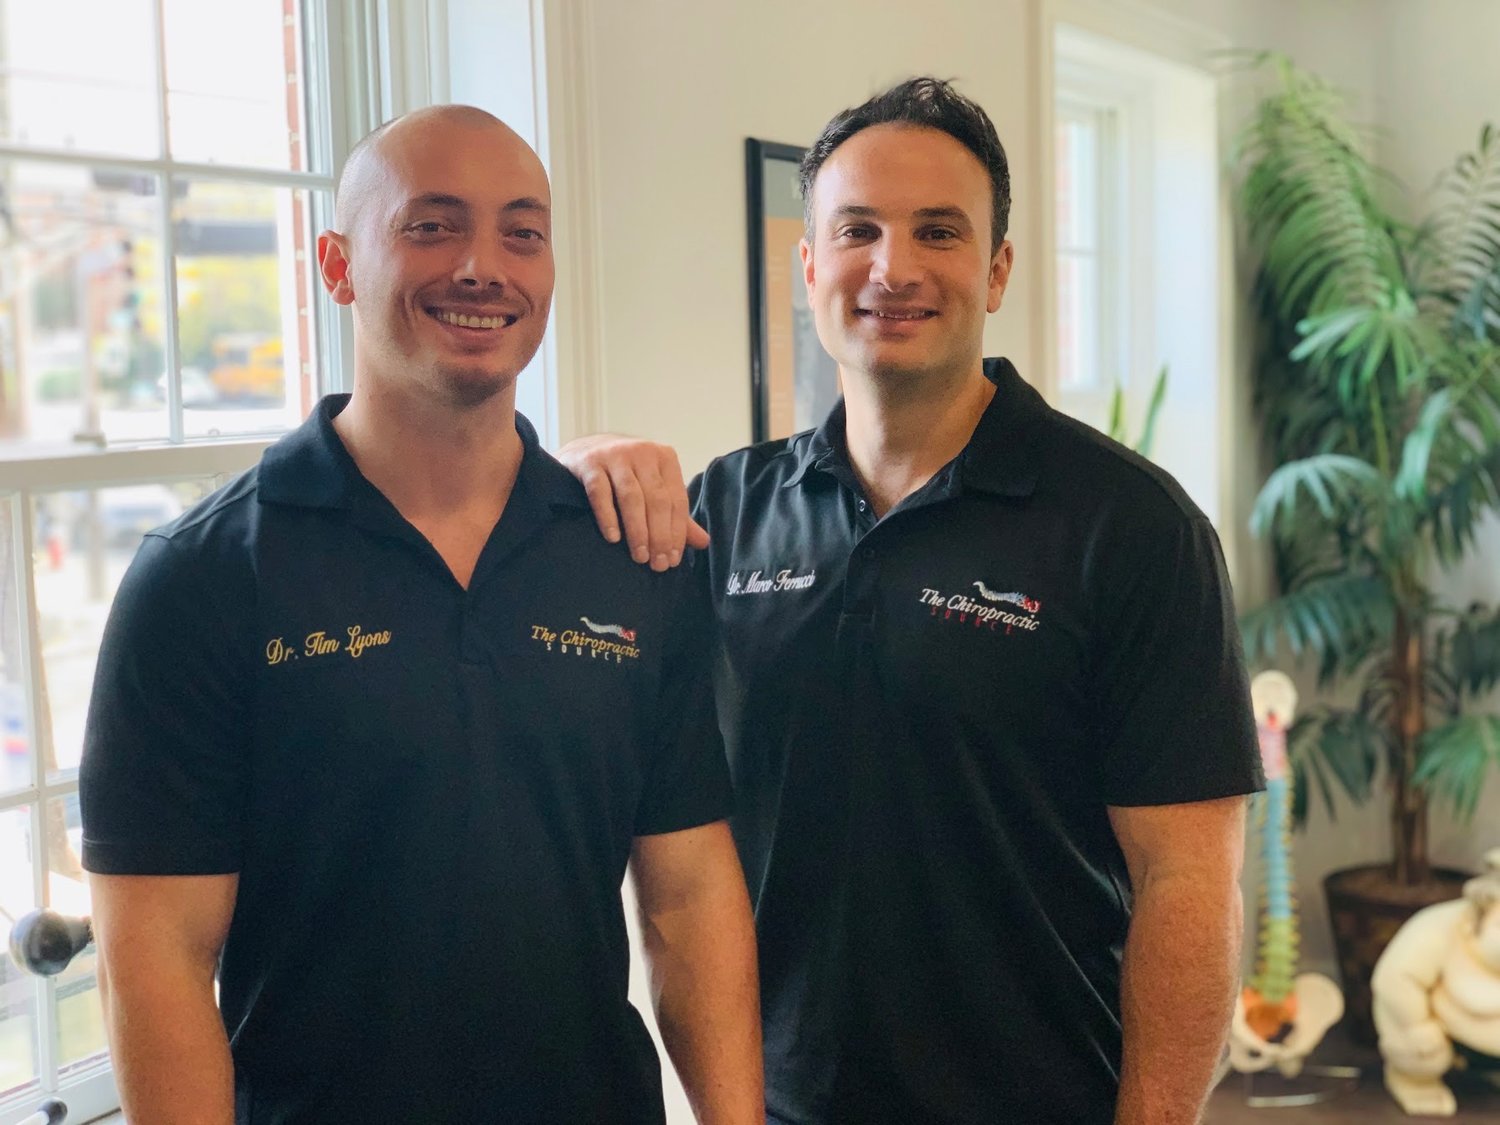 Drs. Tim Lyons and Marco Ferrucci invite patients to their Regenerate SoftWave Therapy and Cedar Grove offices to be treated for numerous inflammation and chronic pain.